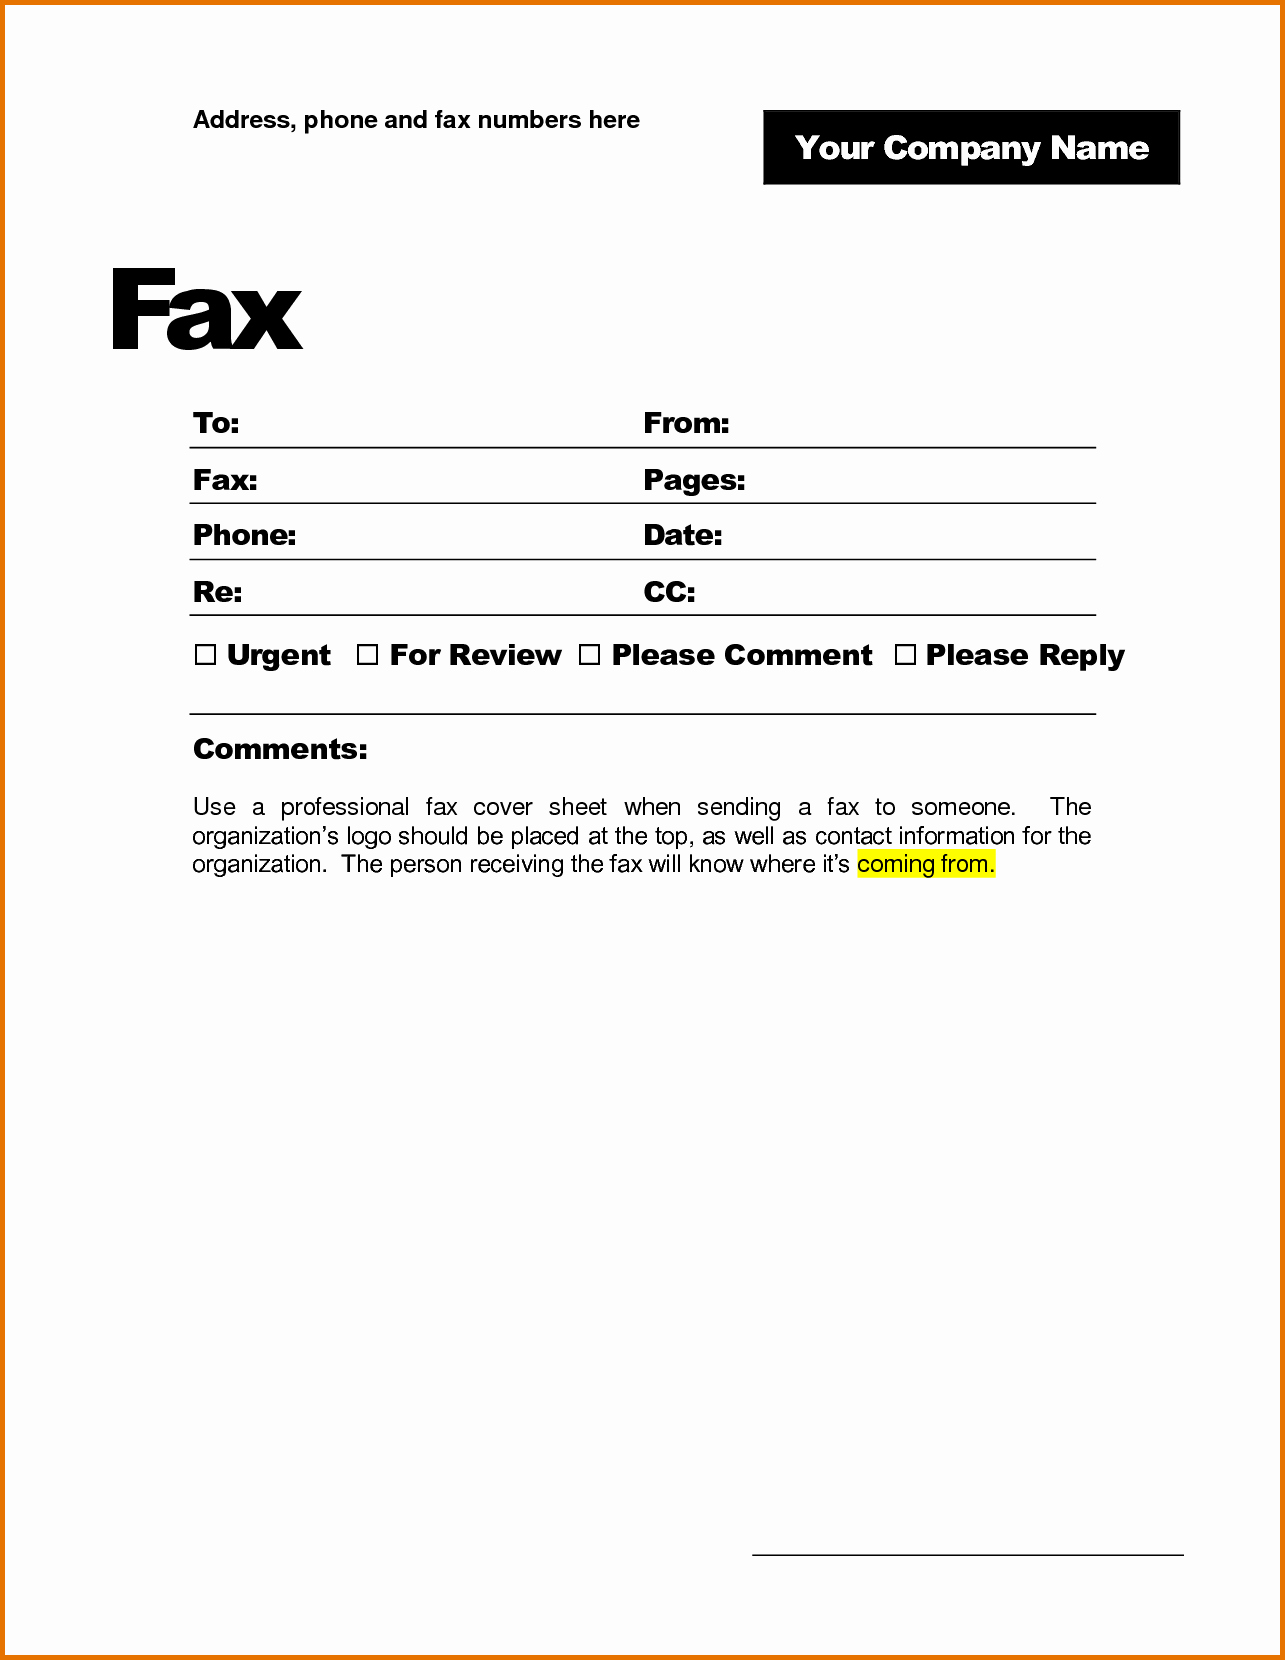 Free Fax Cover Sheet Templates Elegant 4 Printable Fax Cover Sheetsreference Letters Words